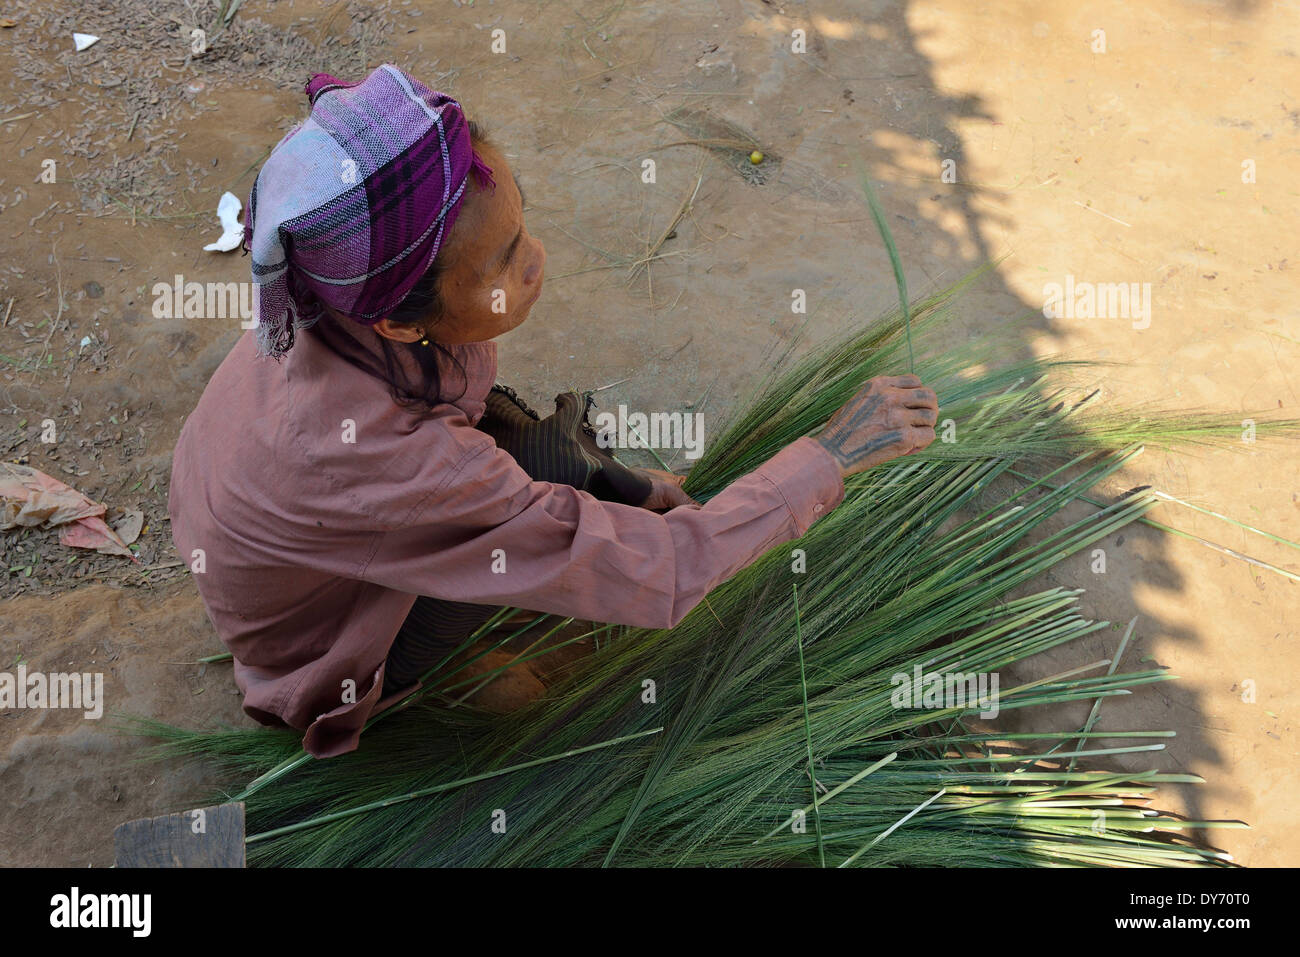 Female Hmong tribe villager sitting on the ground with broom grass (Thysanolaena maxima)to make brushes alongside the River Mekong,Laos,Southeast Asia Stock Photo